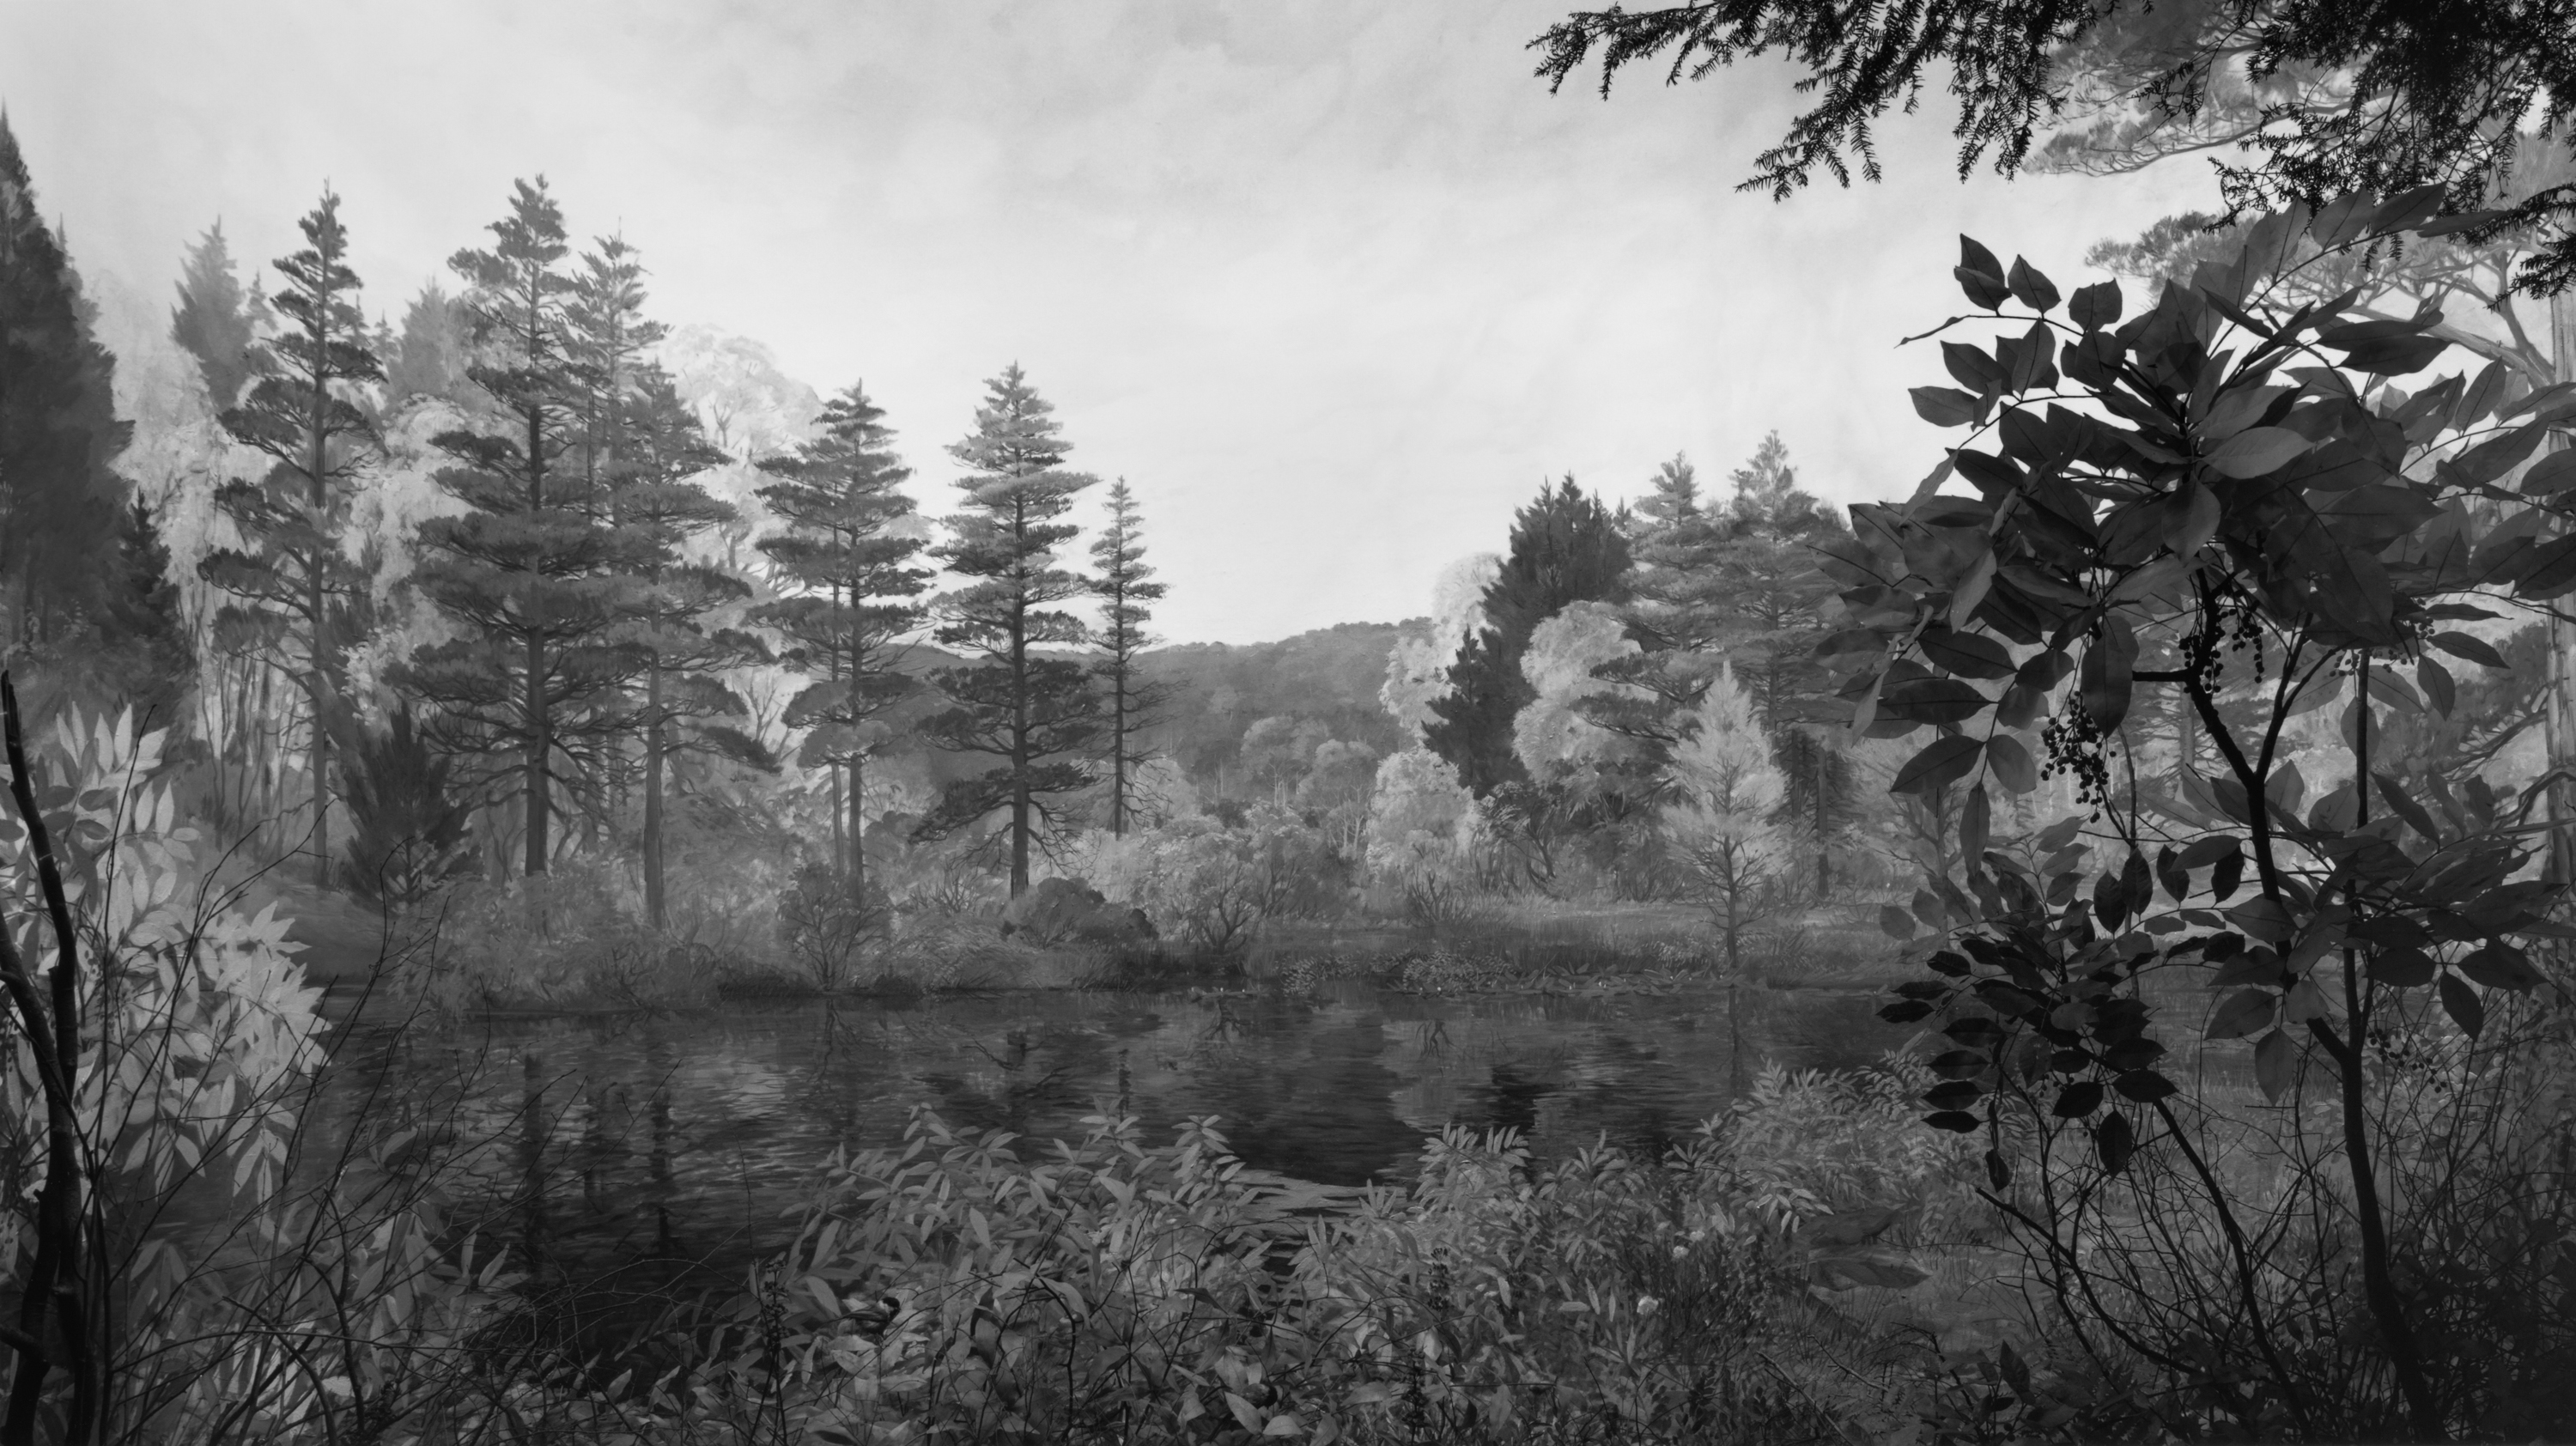 Black and white photograph of a diorama depicting a body of water surrounded by a verdant valley